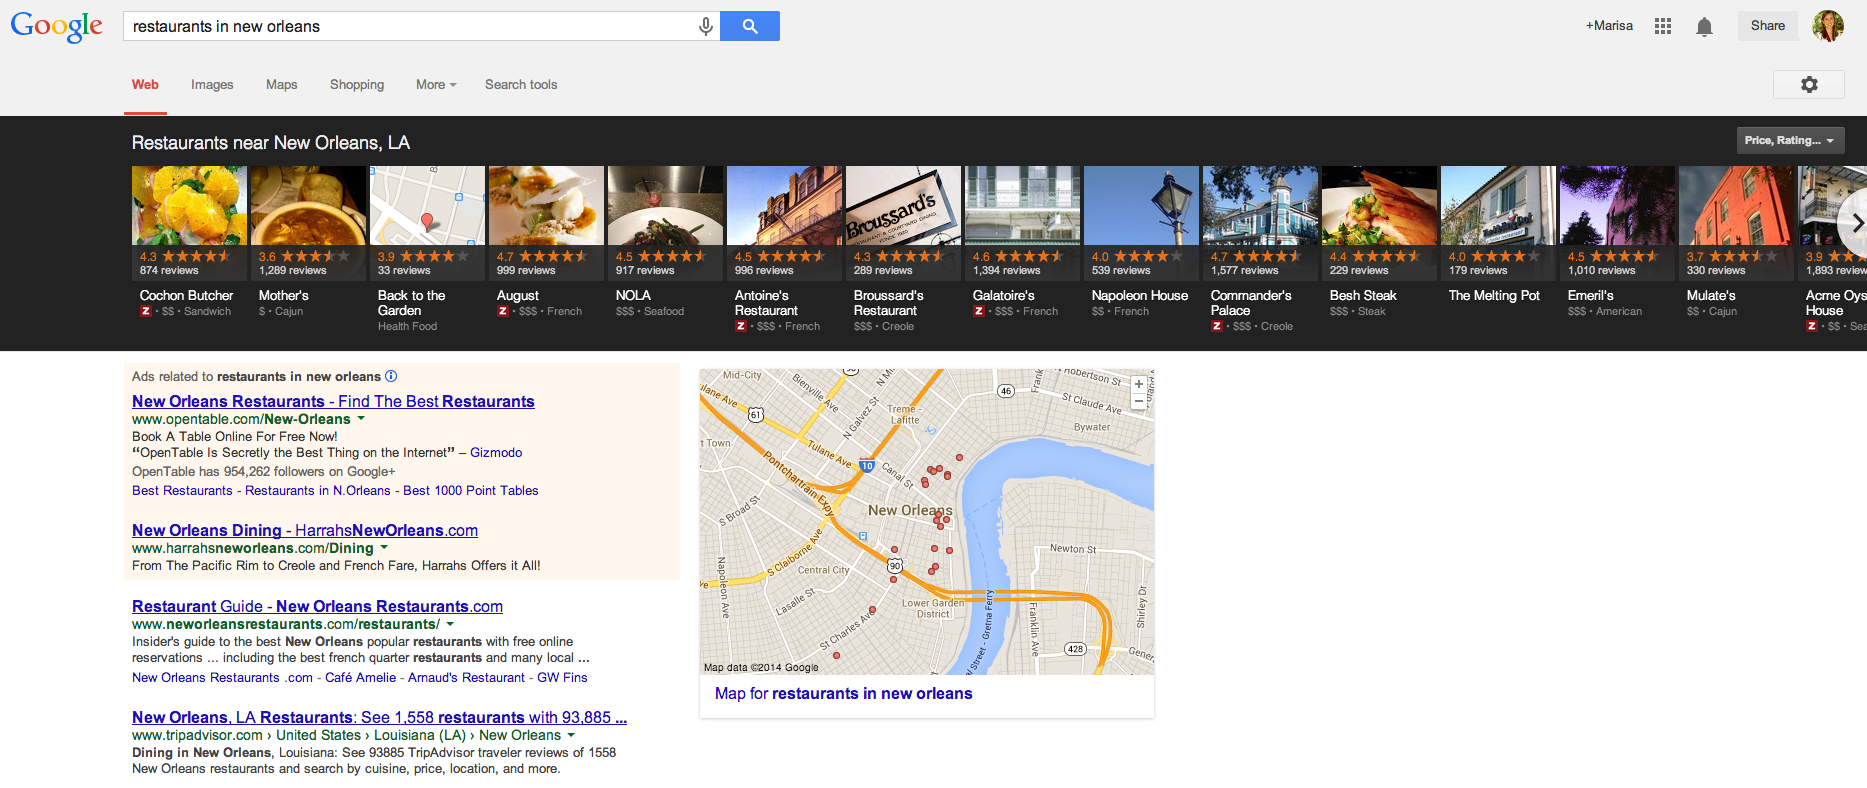 Search Result Displaying Google Carousel